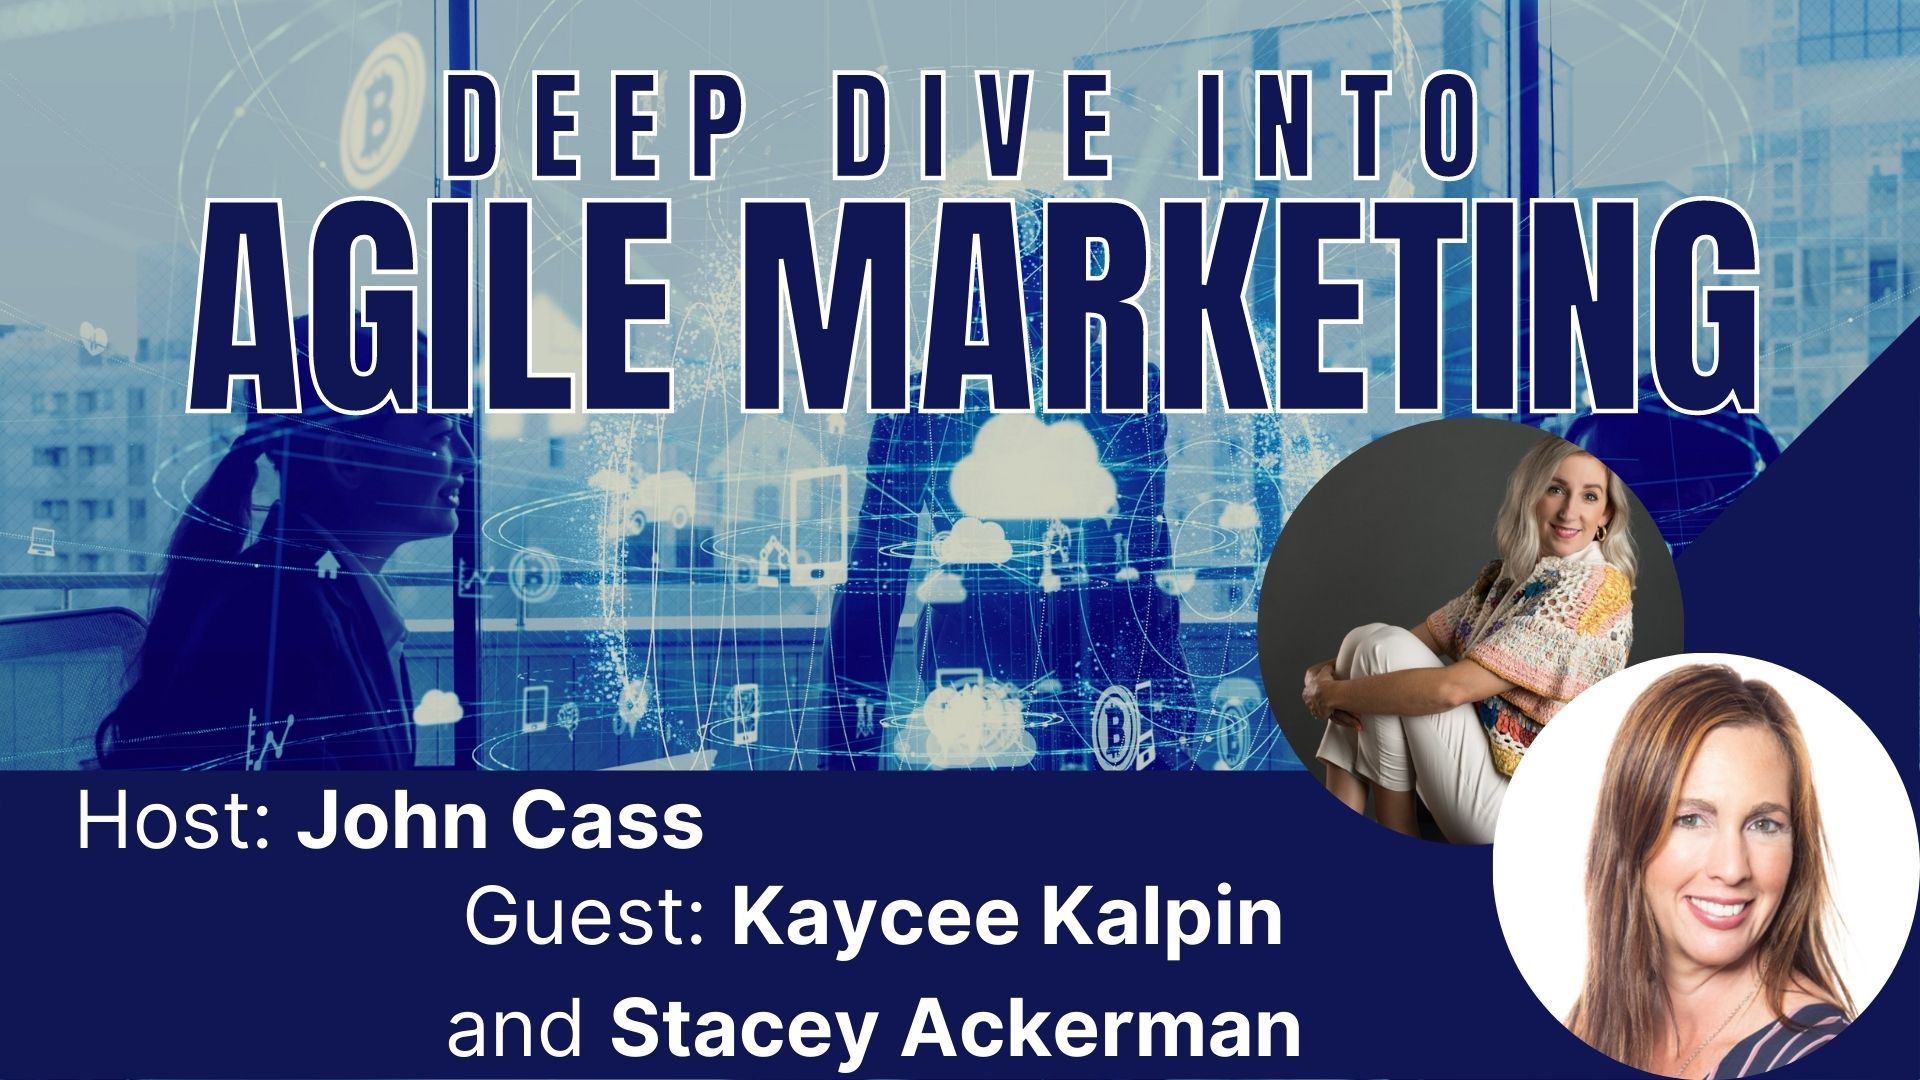 Leading Agile Marketing with Kaycee Kalpin (Premier Inc.) and Stacey Ackerman